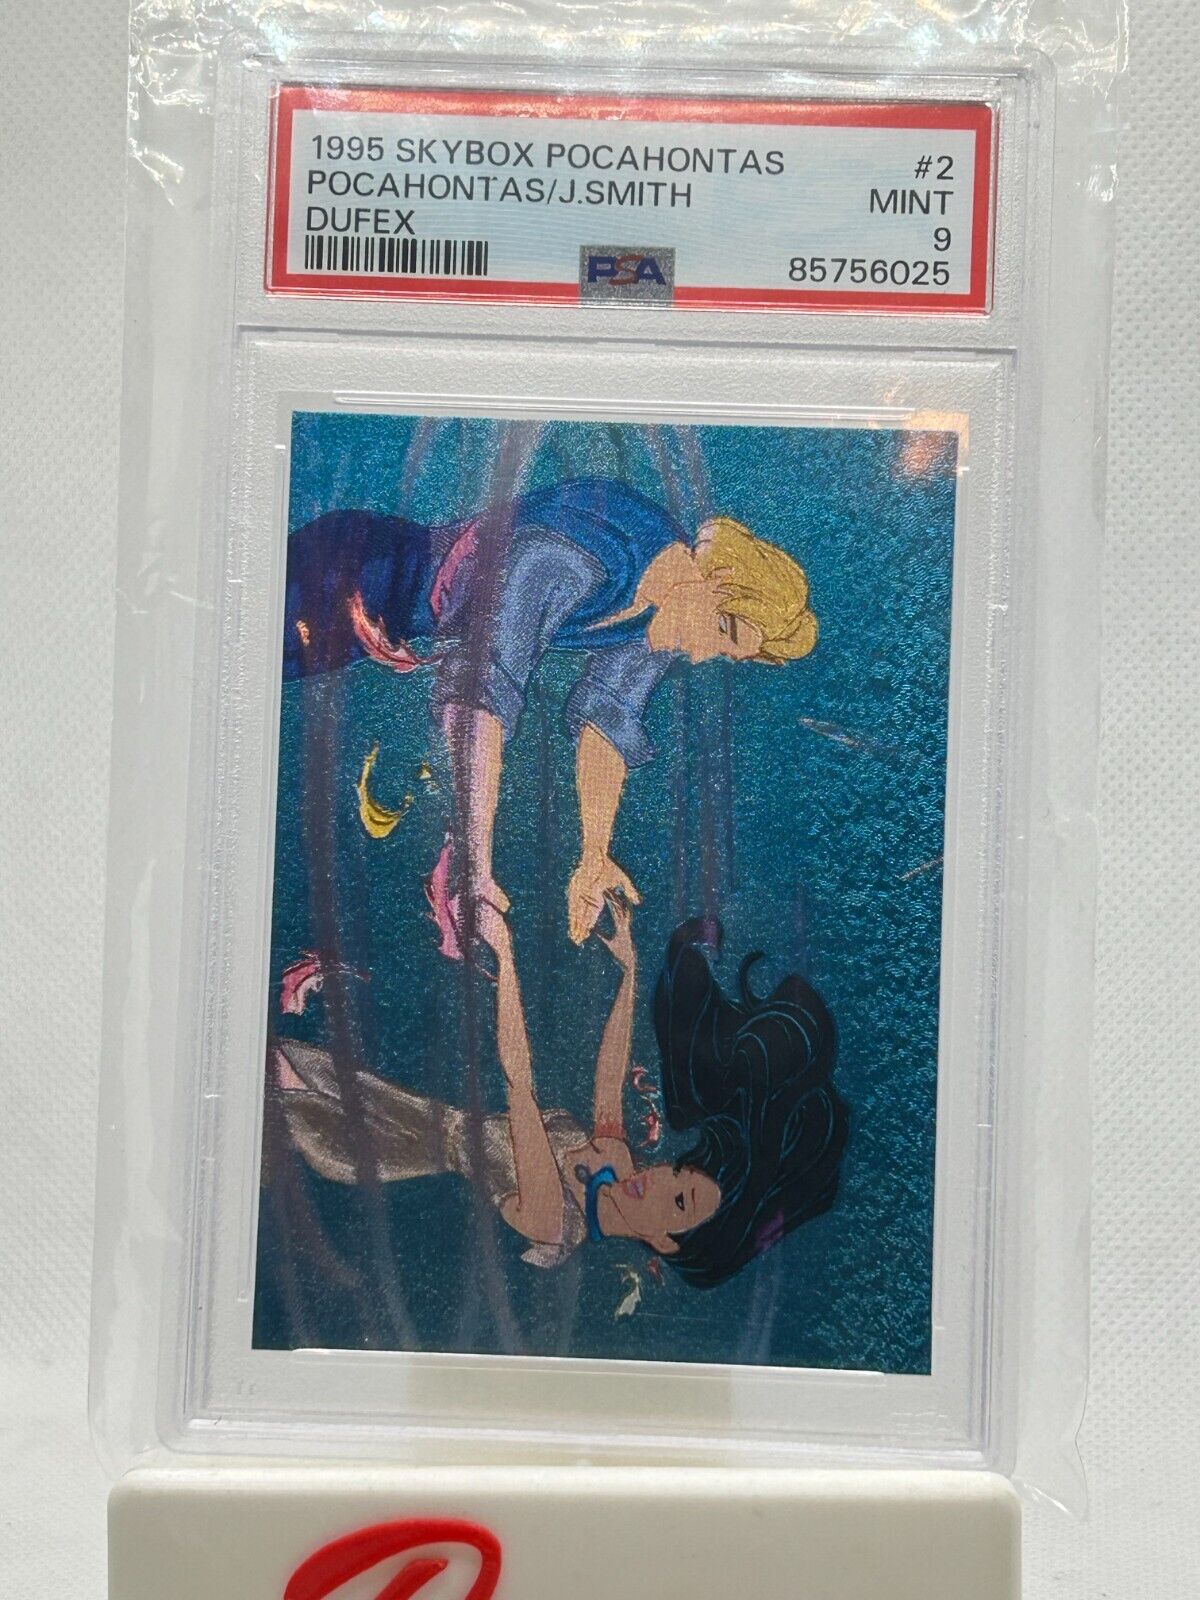 1995 SkyBox Etched Foil Dufex Spectra Chase Card Disney's POCAHONTAS PSA 9